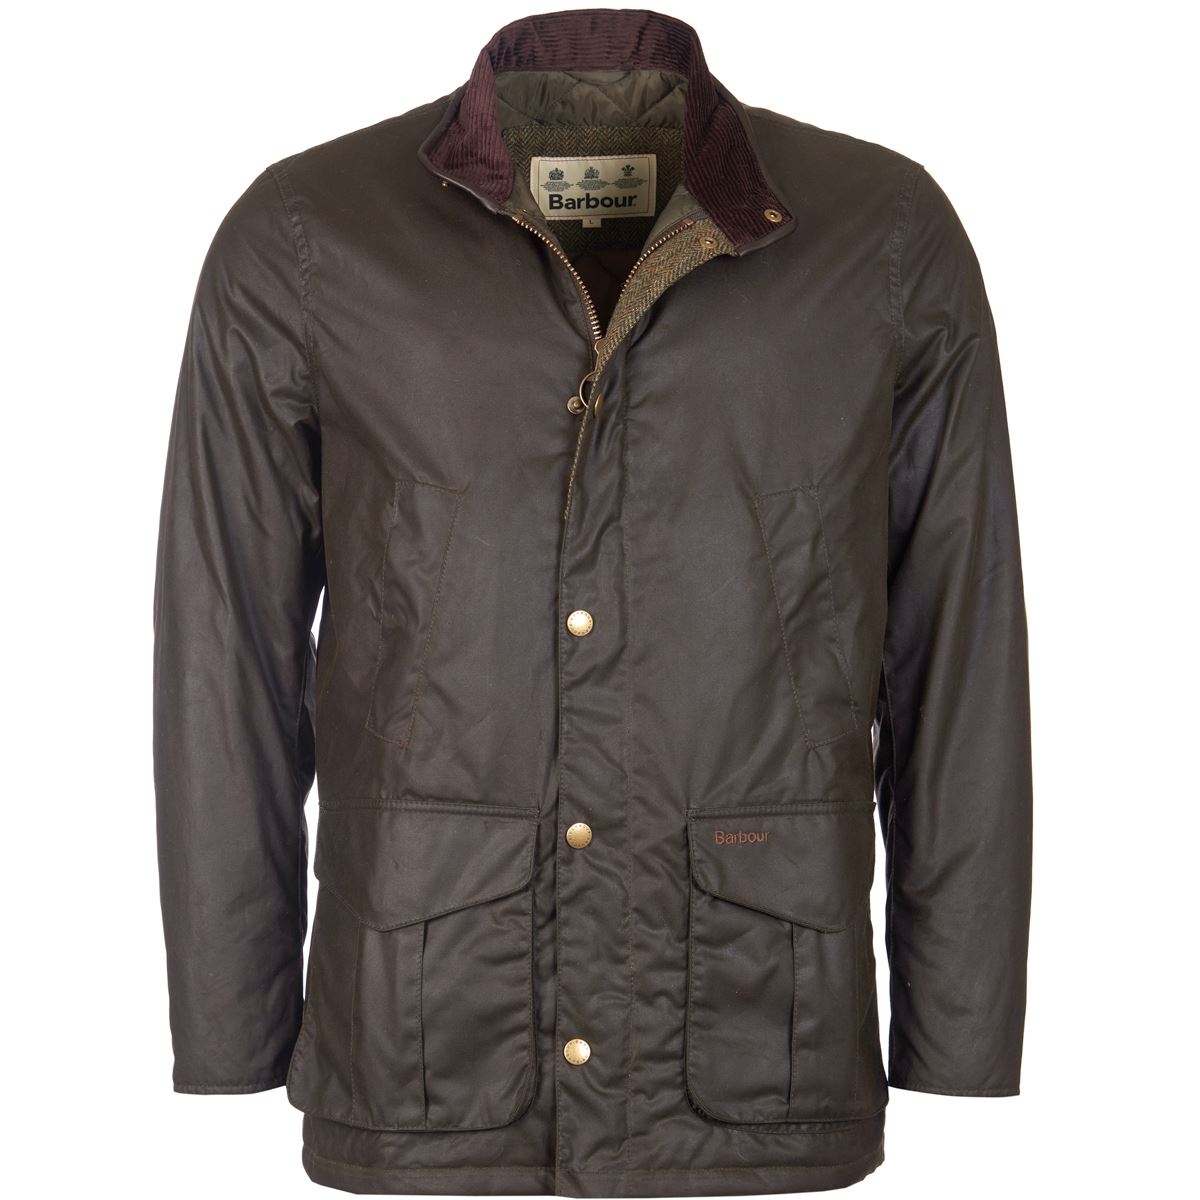 What purpose does the Barbour Hereford jacket serve?